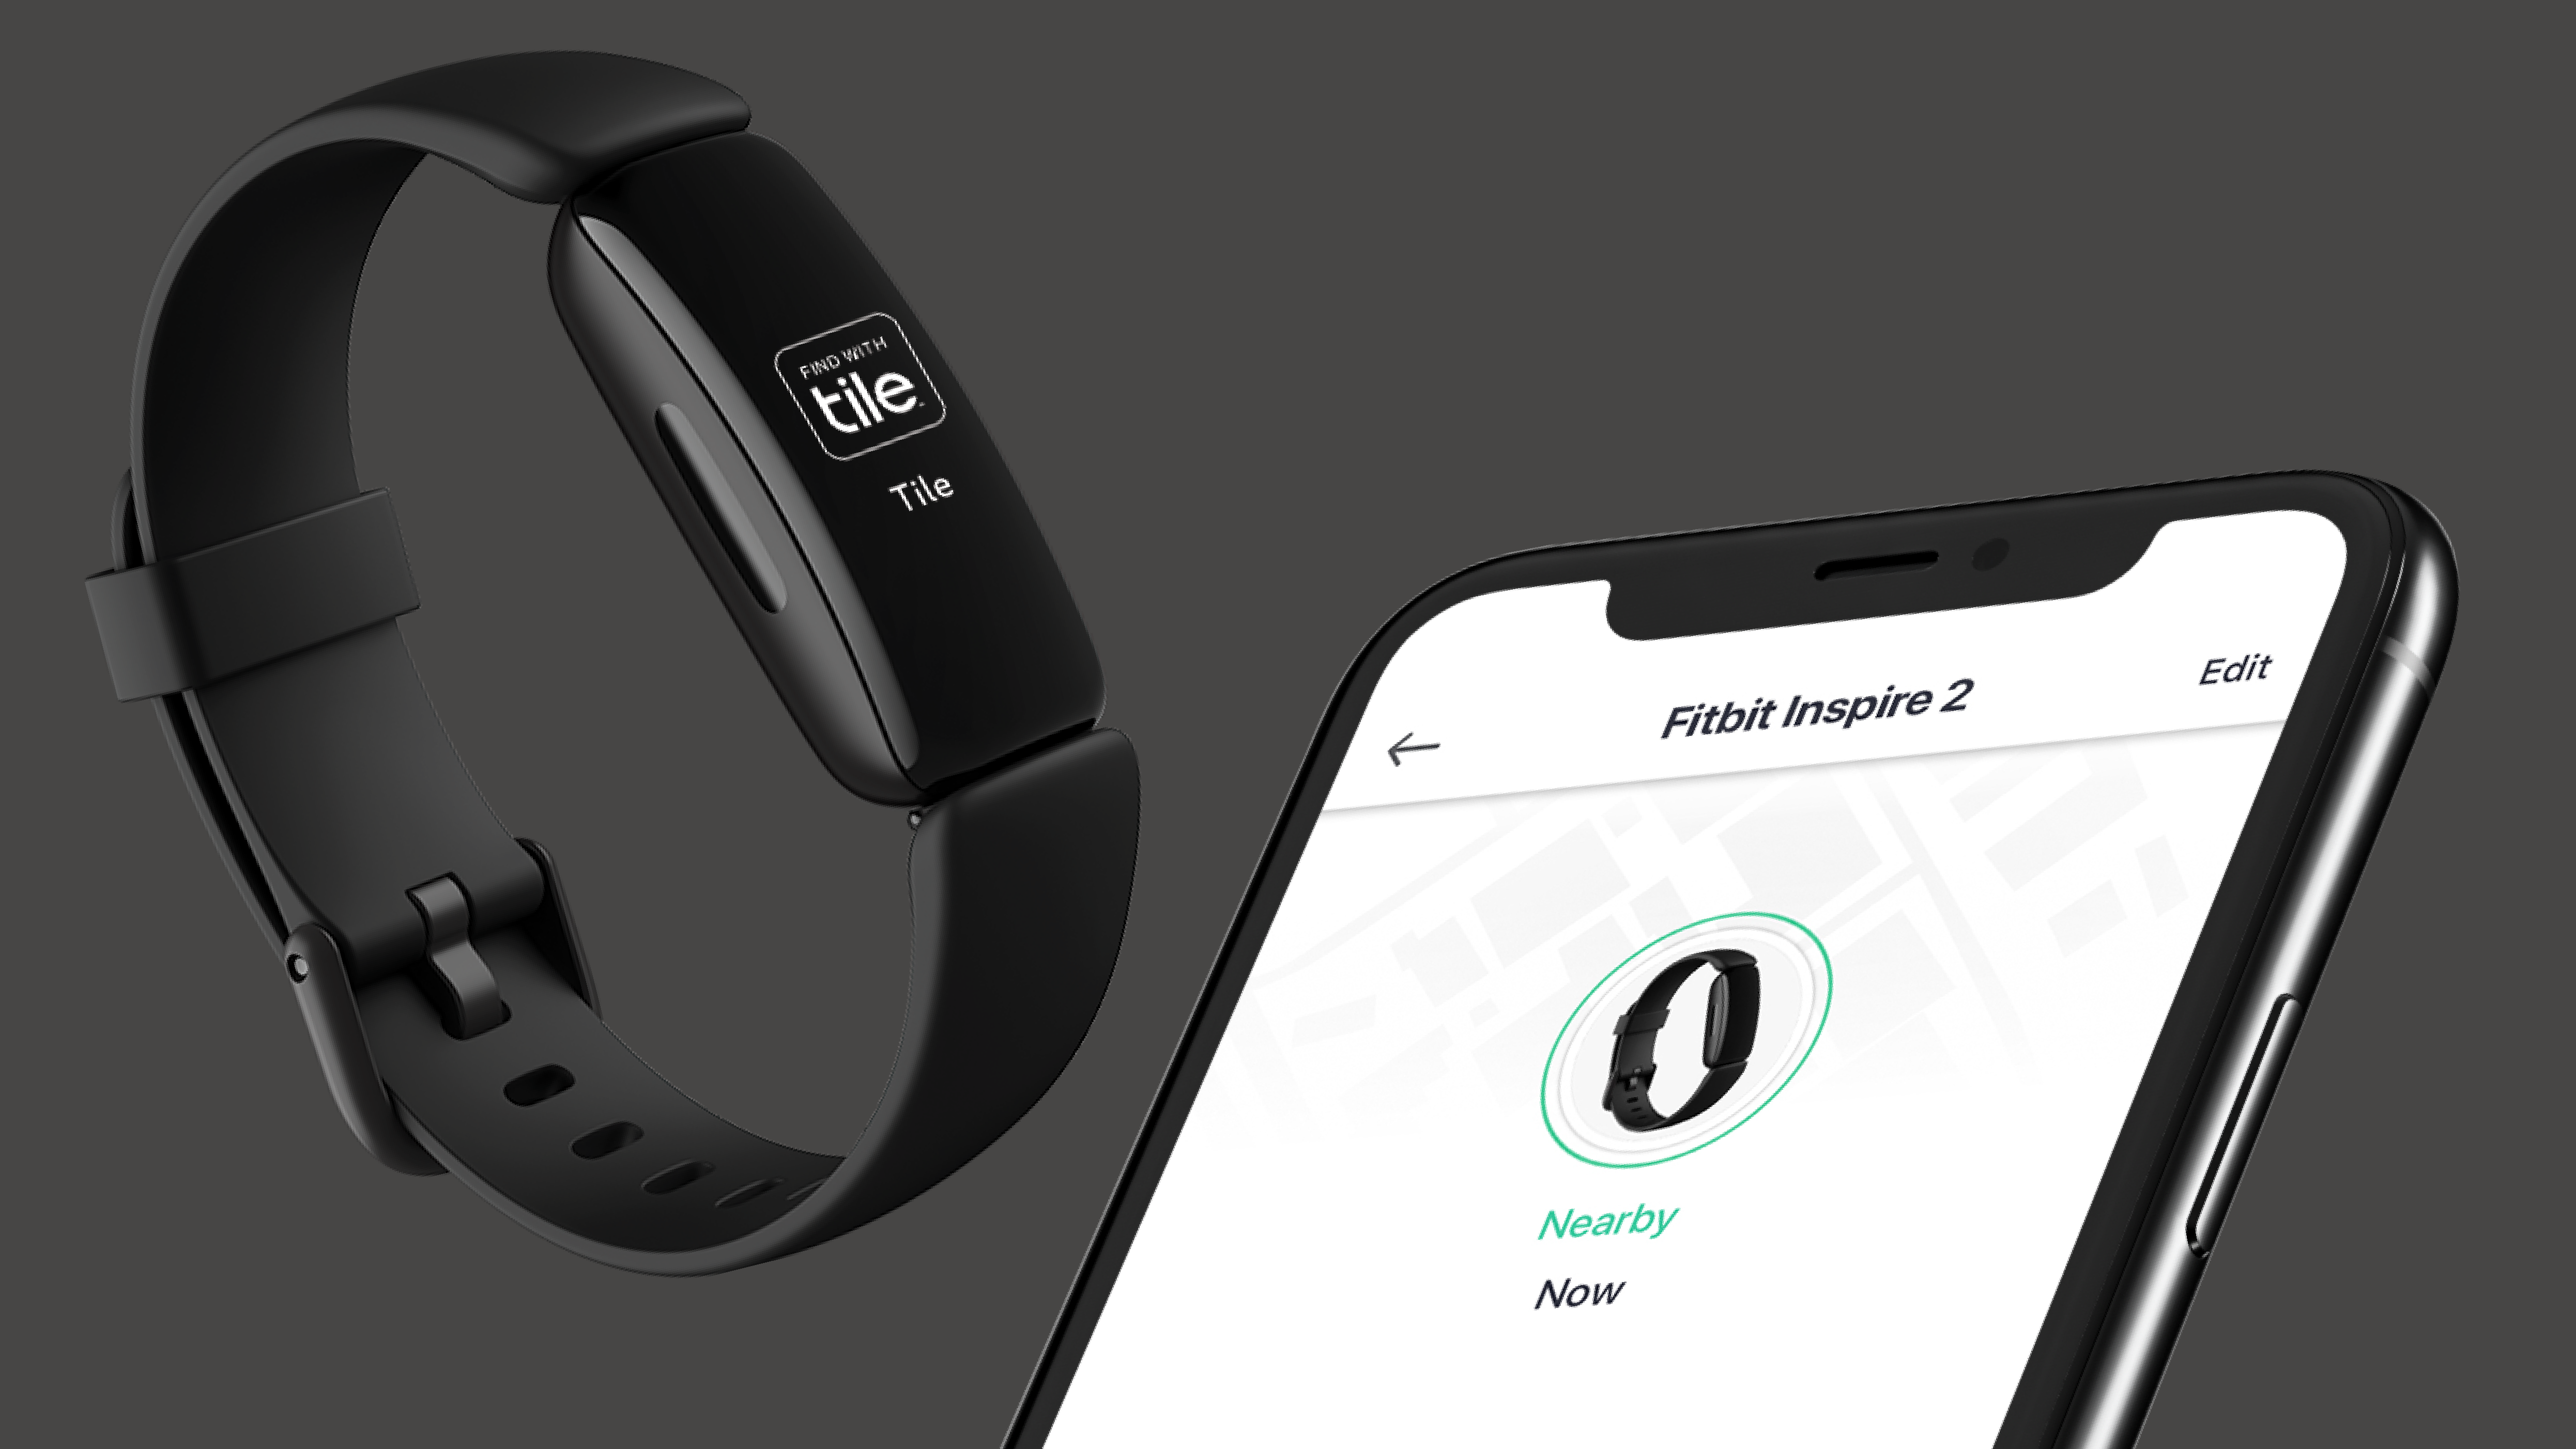 Logro africano Camello You can now find your Fitbit using your phone | TechRadar